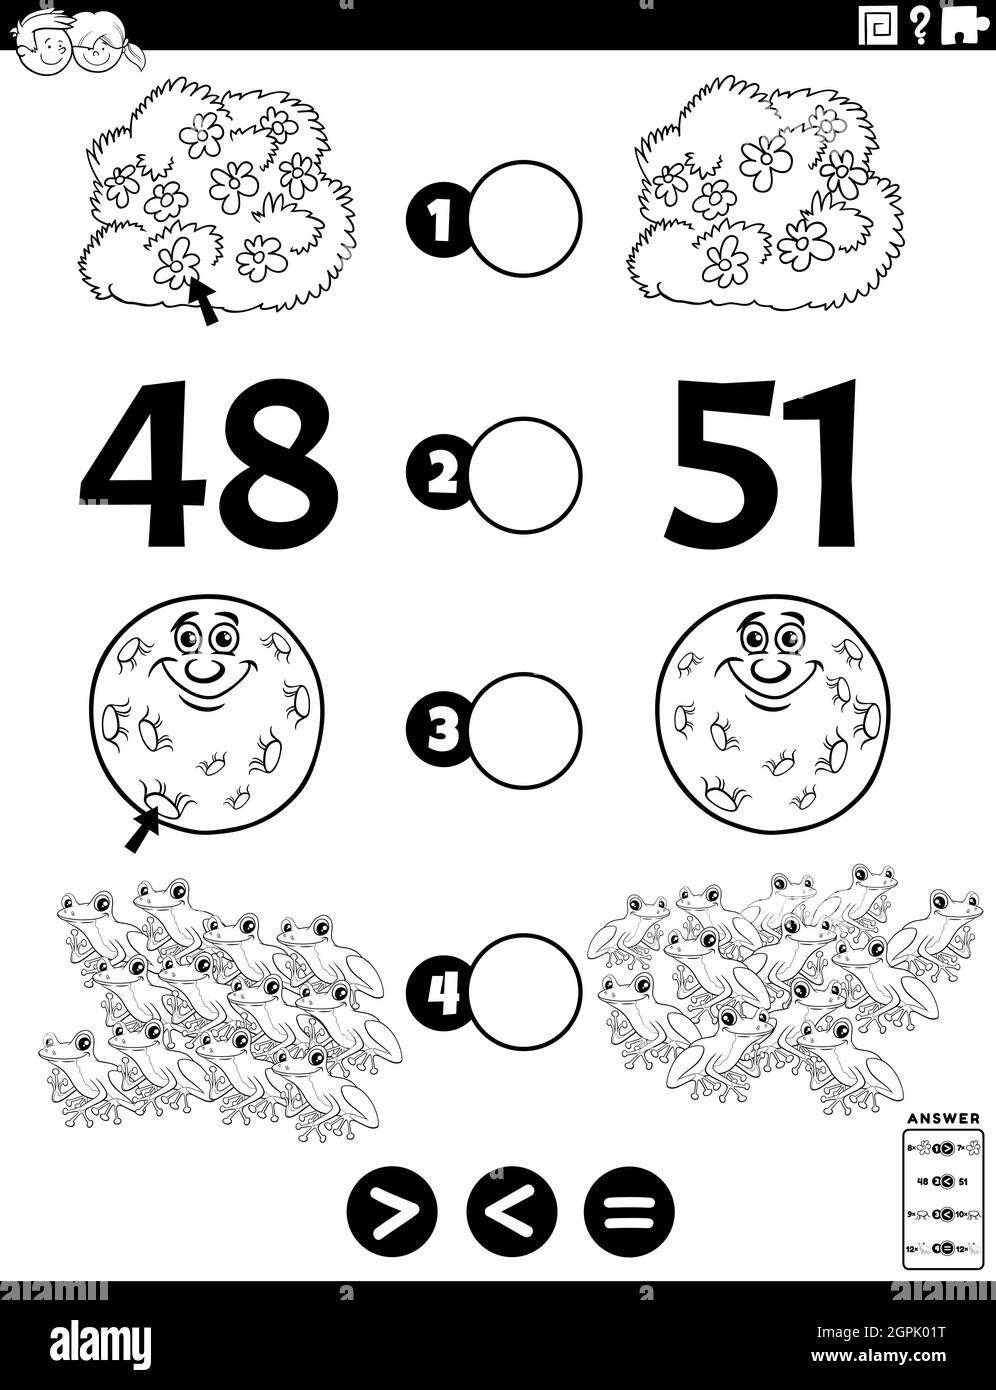 greater less or equal task for kids coloring book page Stock Vector